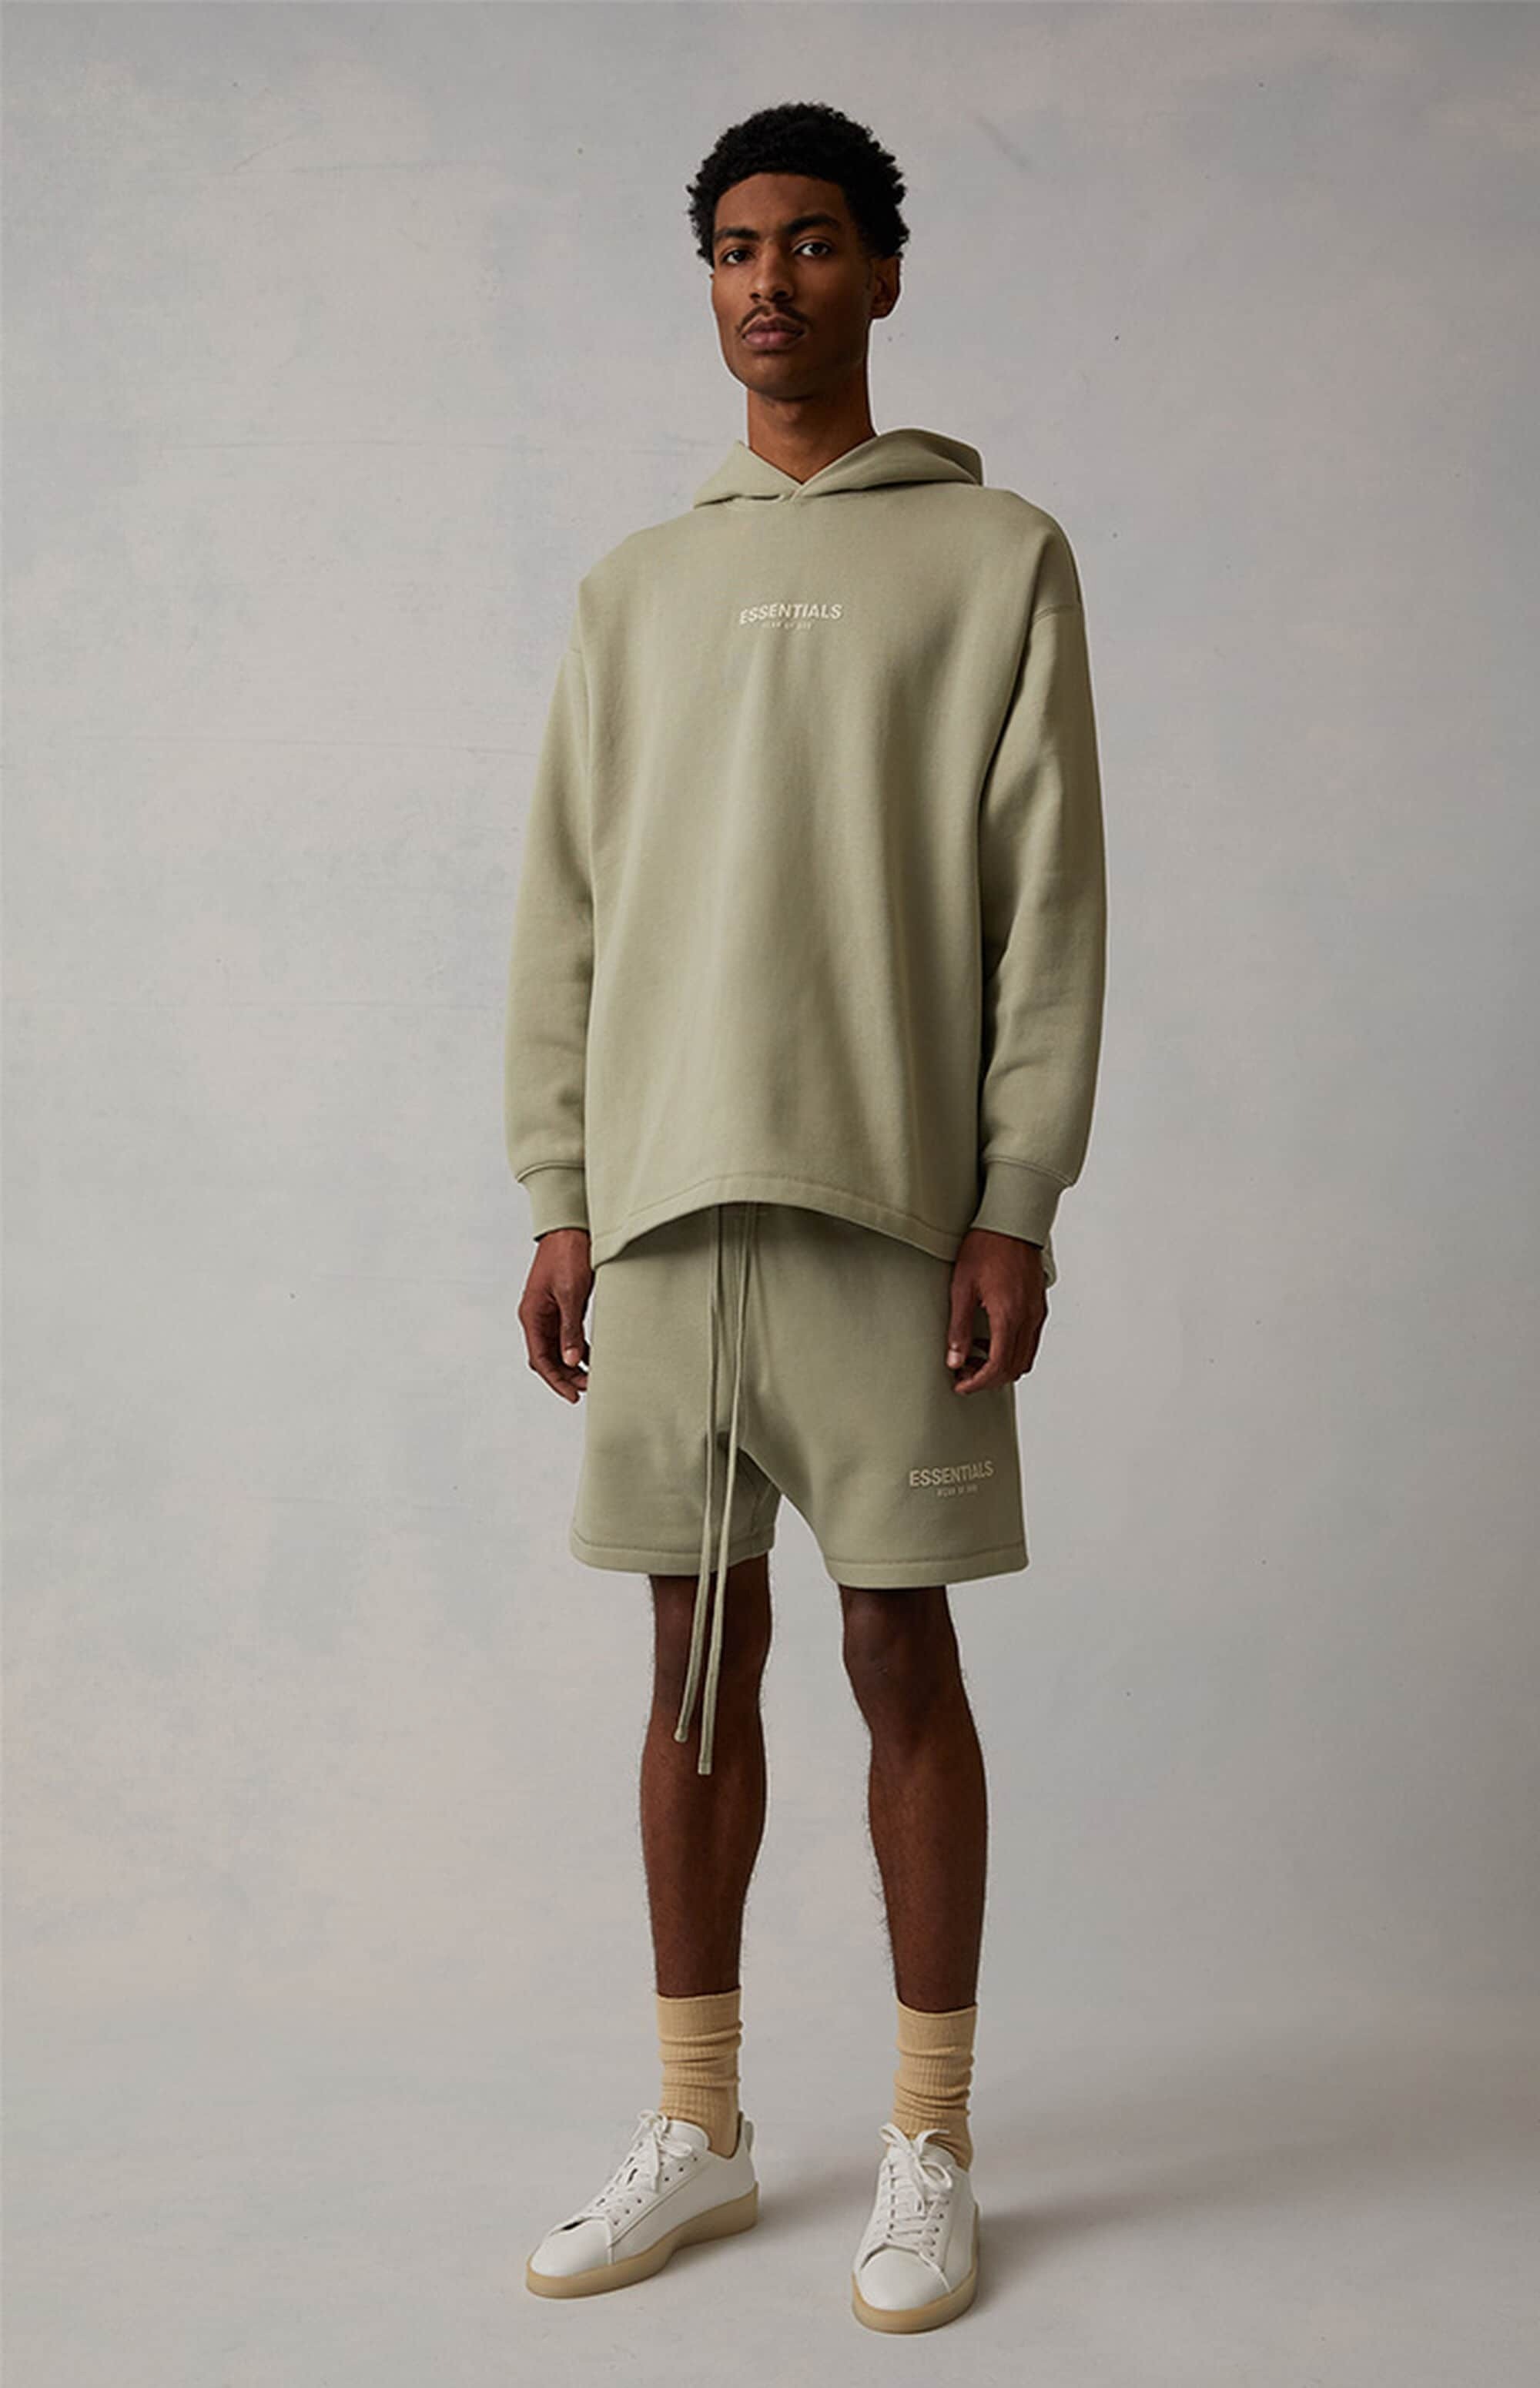 FOG Essentials Spring 2022 Men's Relaxed Sweat Shorts